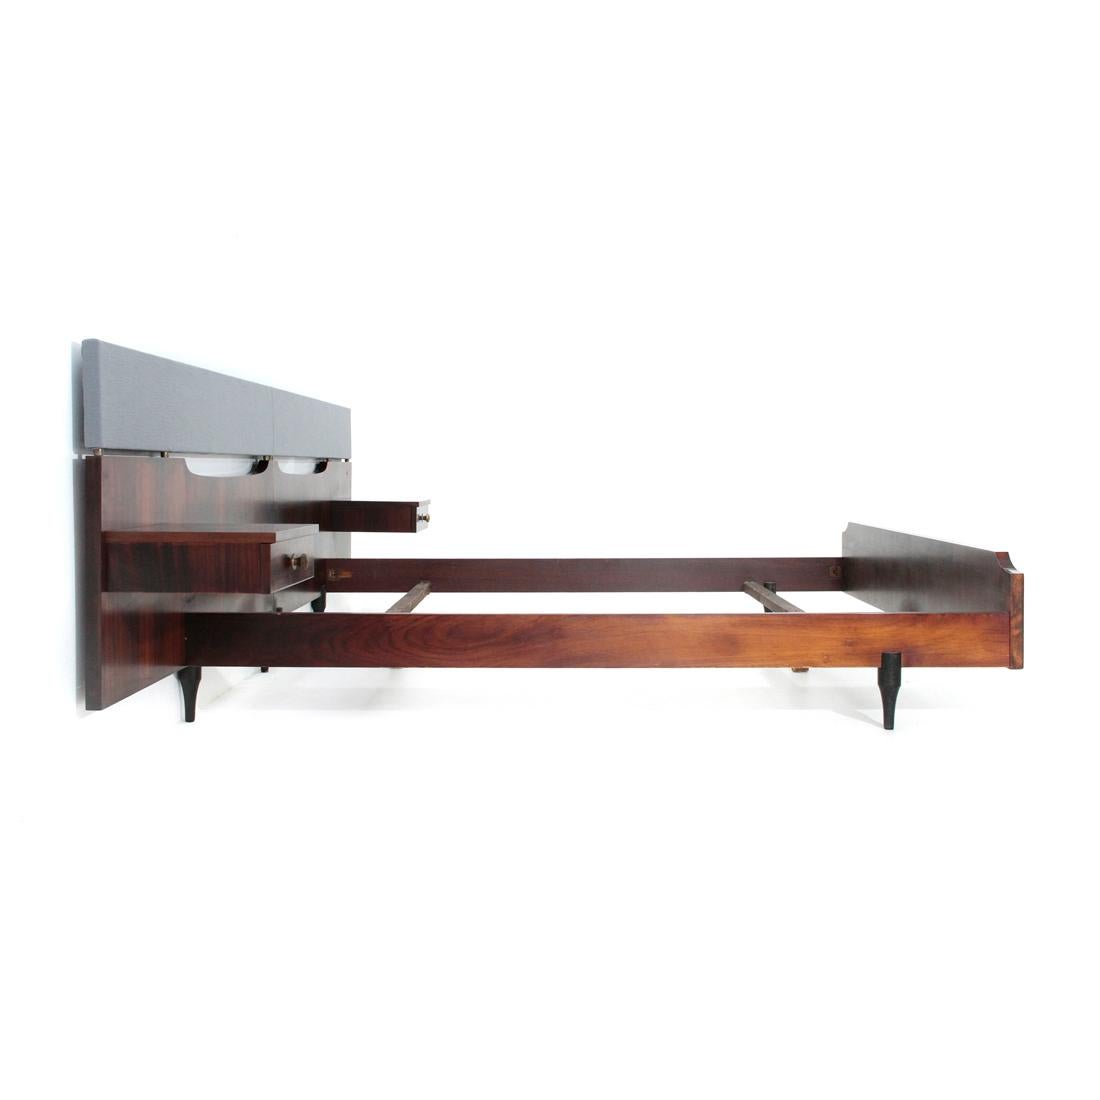 Mid-Century Modern Midcentury Wood Italian Bed by Claudio Salocchi for Sormani, 1960s For Sale